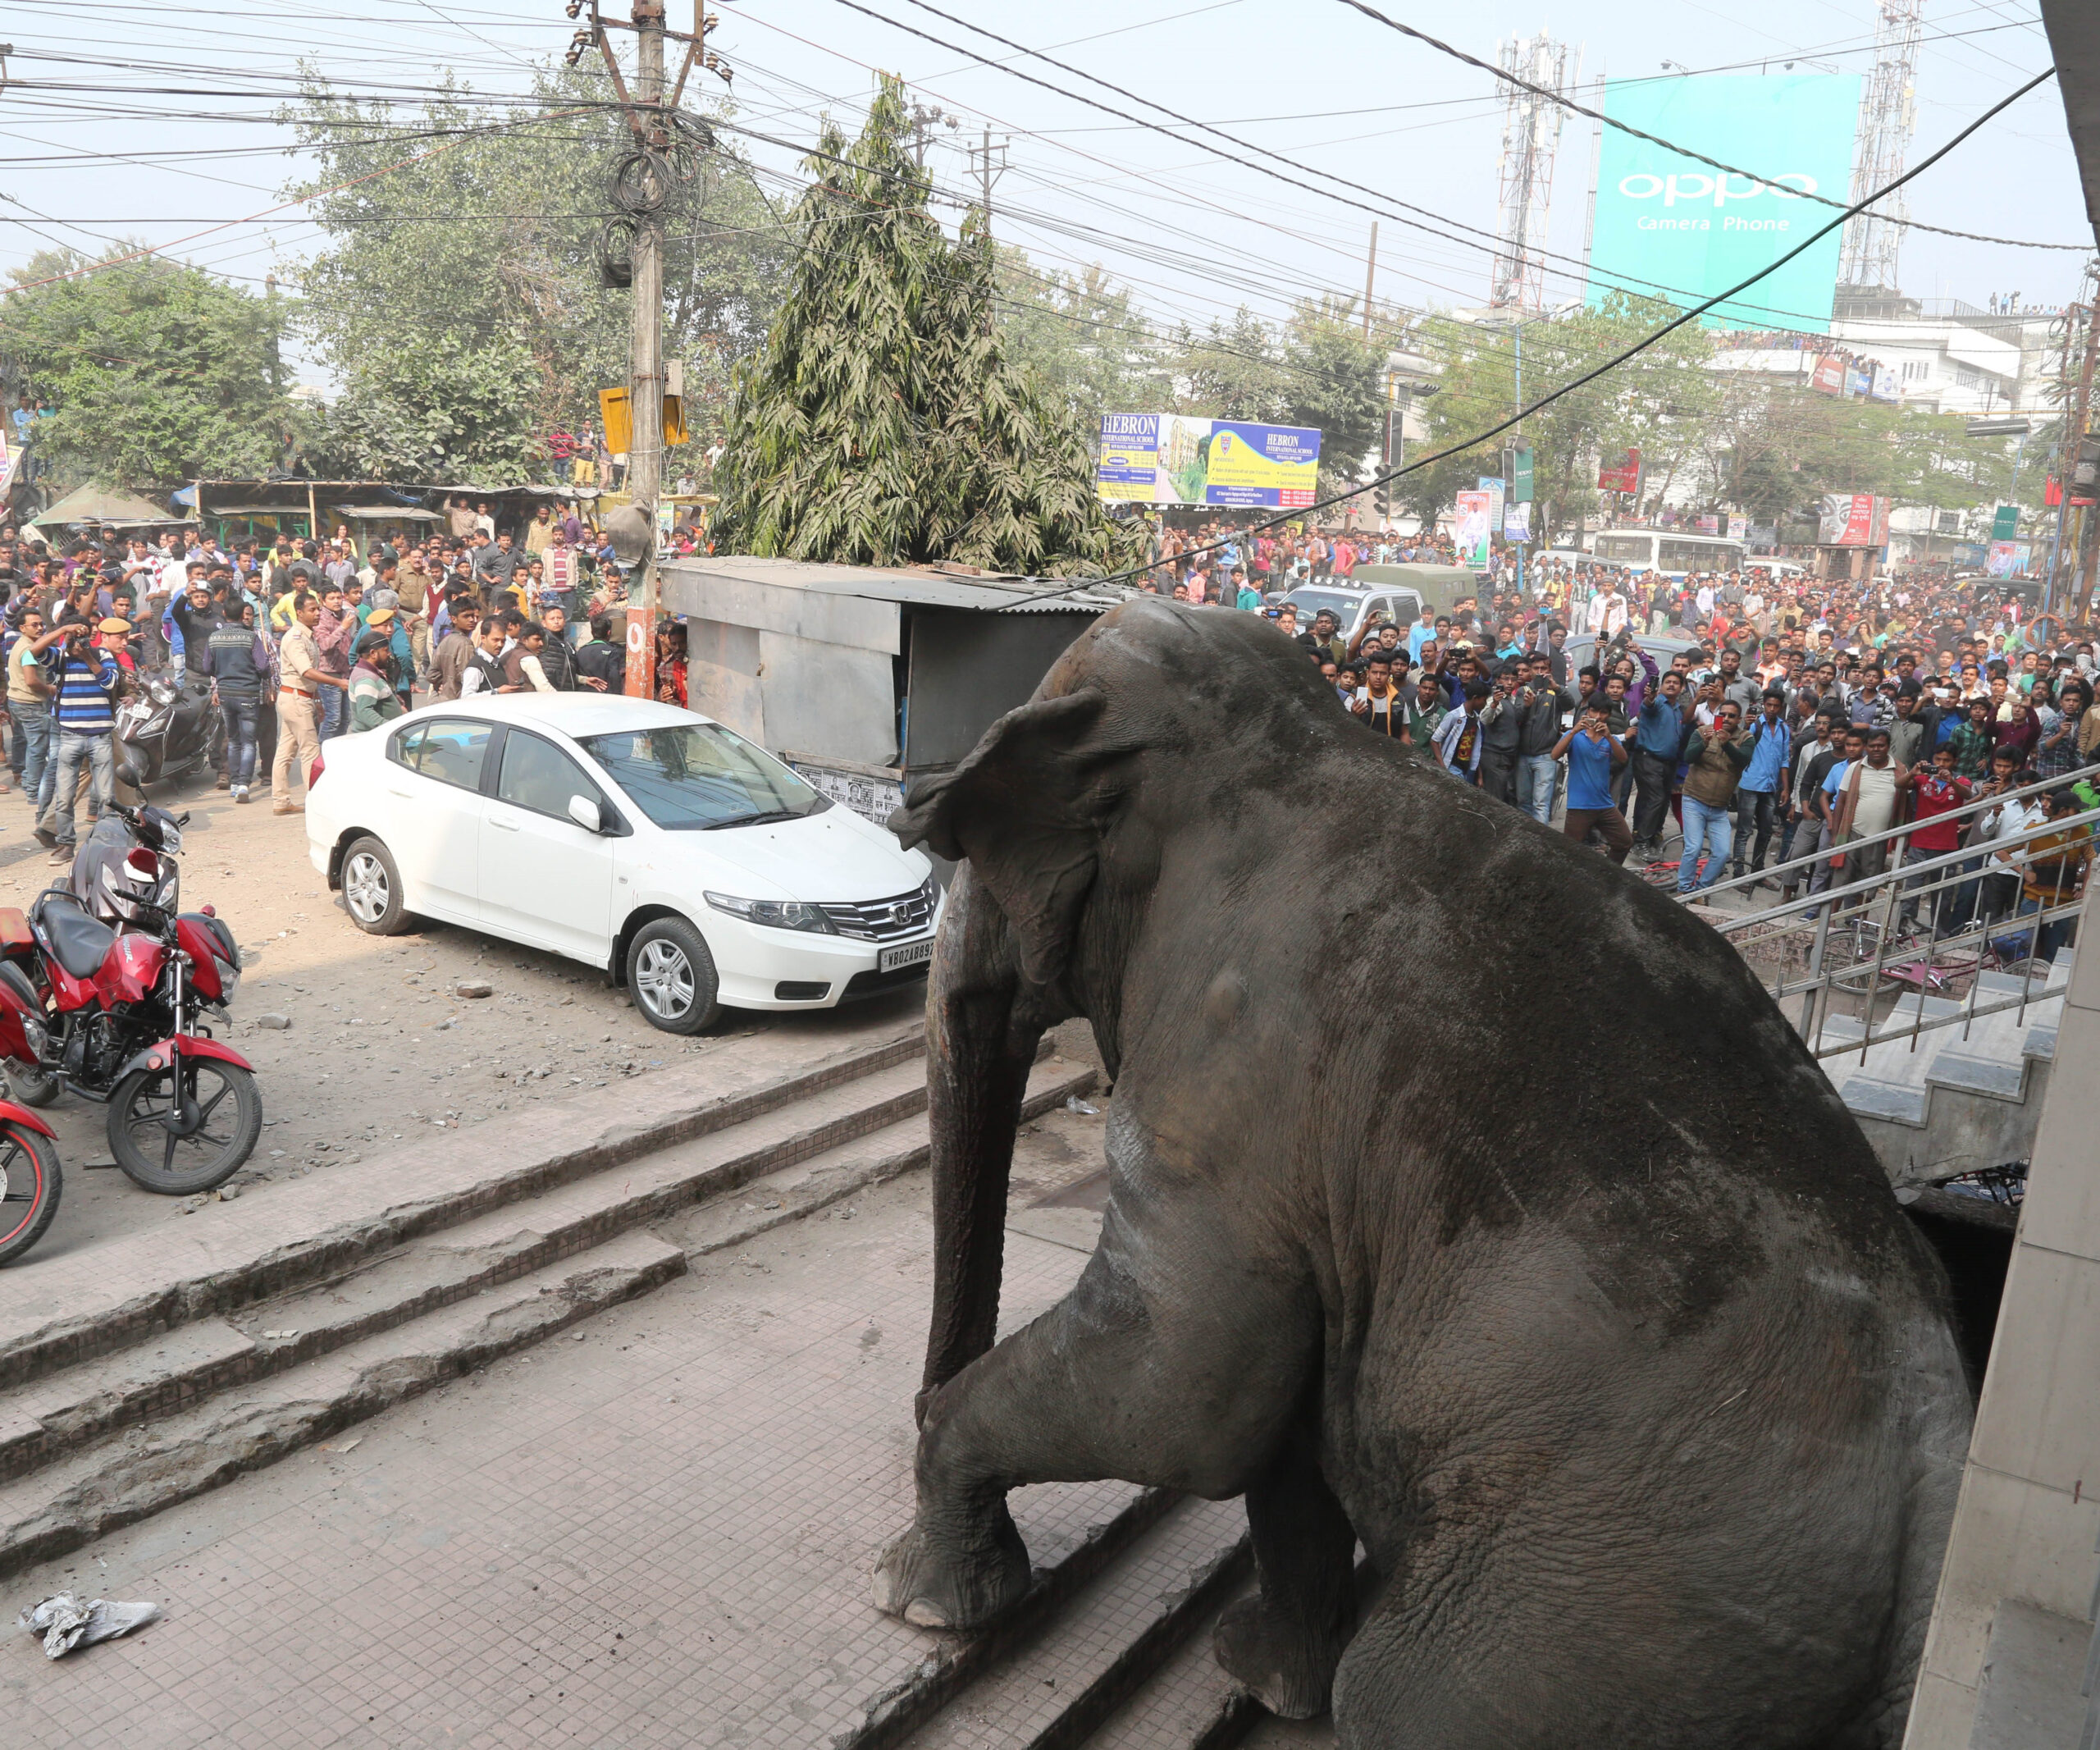 IN PICTURES: Wild elephant goes on terrifying rampage in India